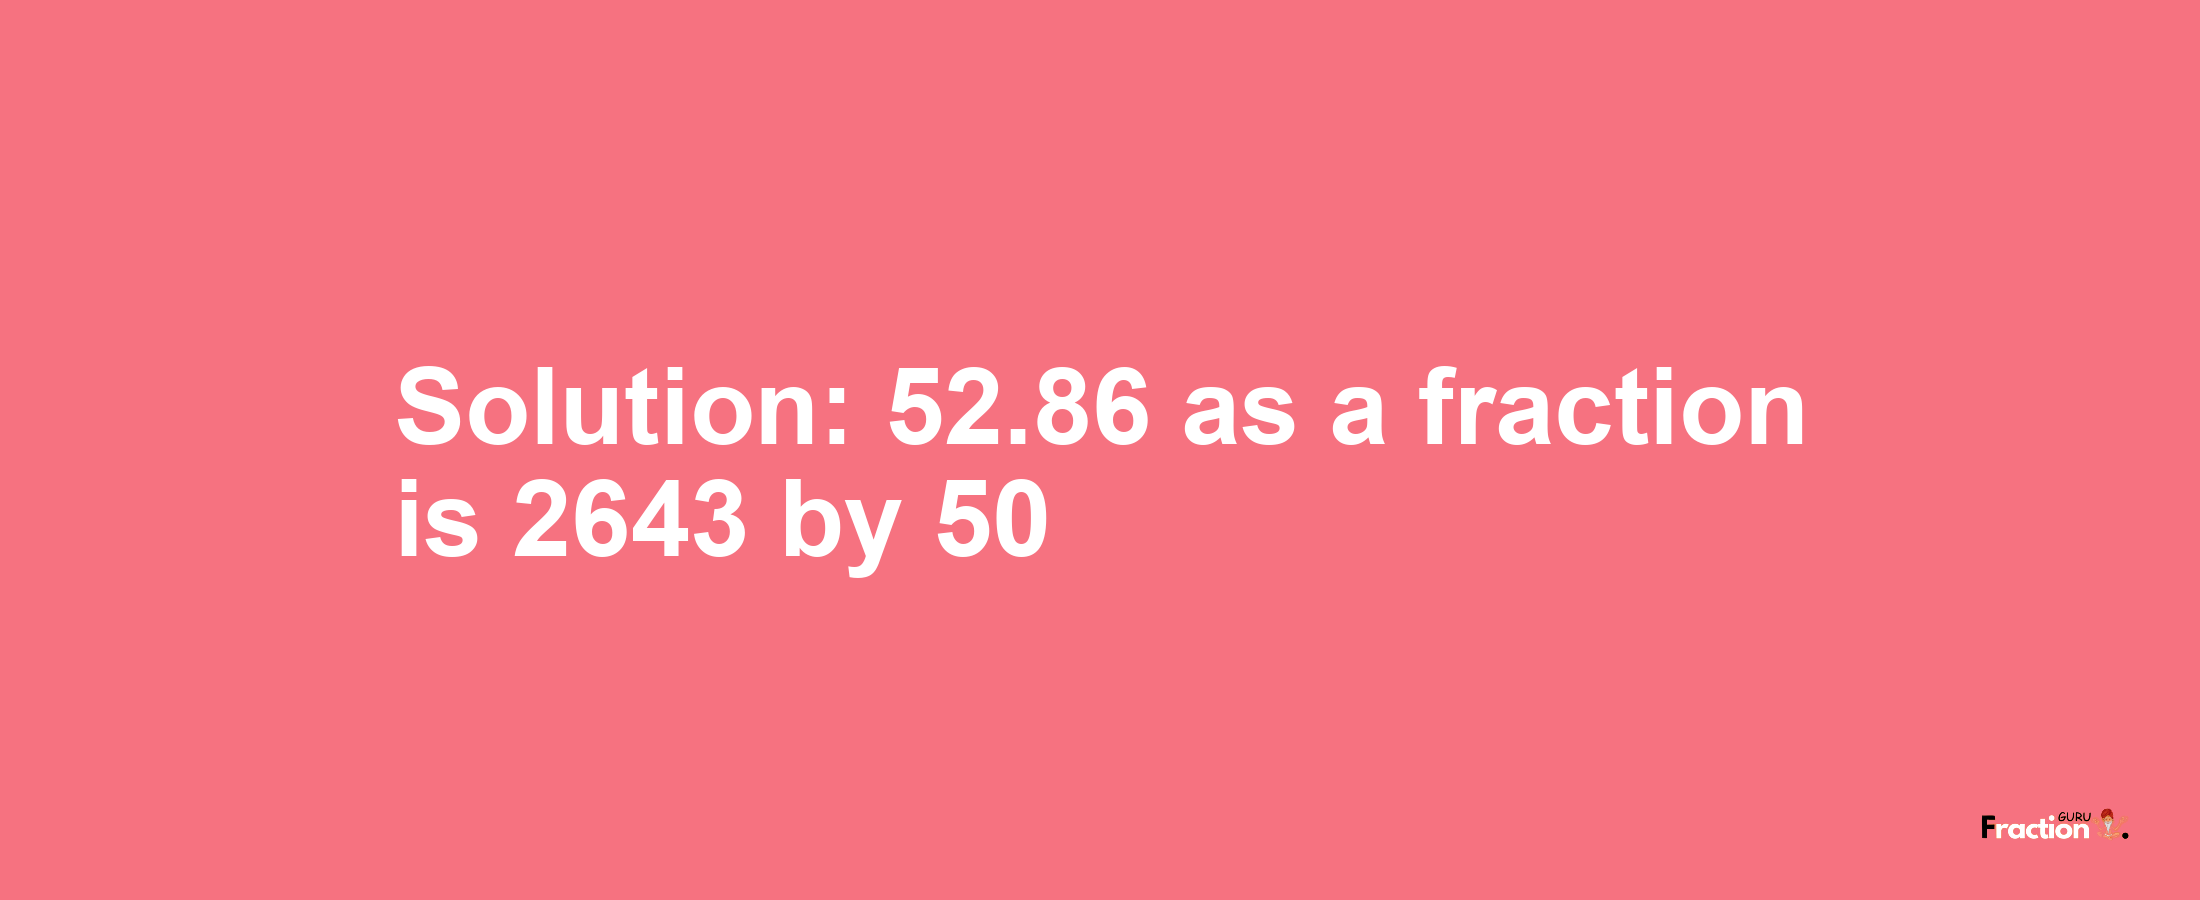 Solution:52.86 as a fraction is 2643/50